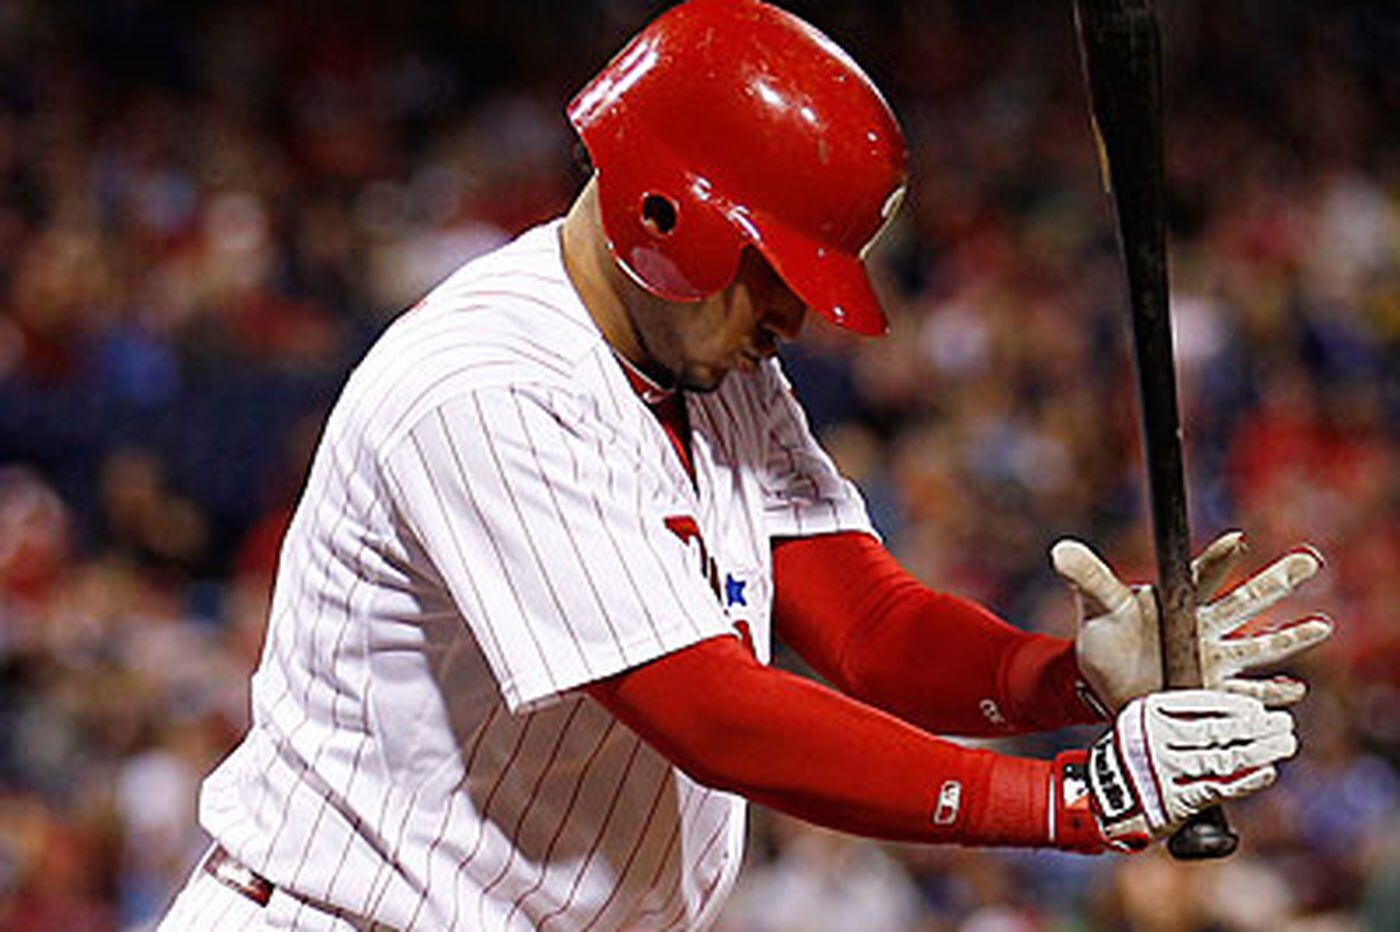 Phillies second baseman Freddy Galvis suspended 50 games after testing